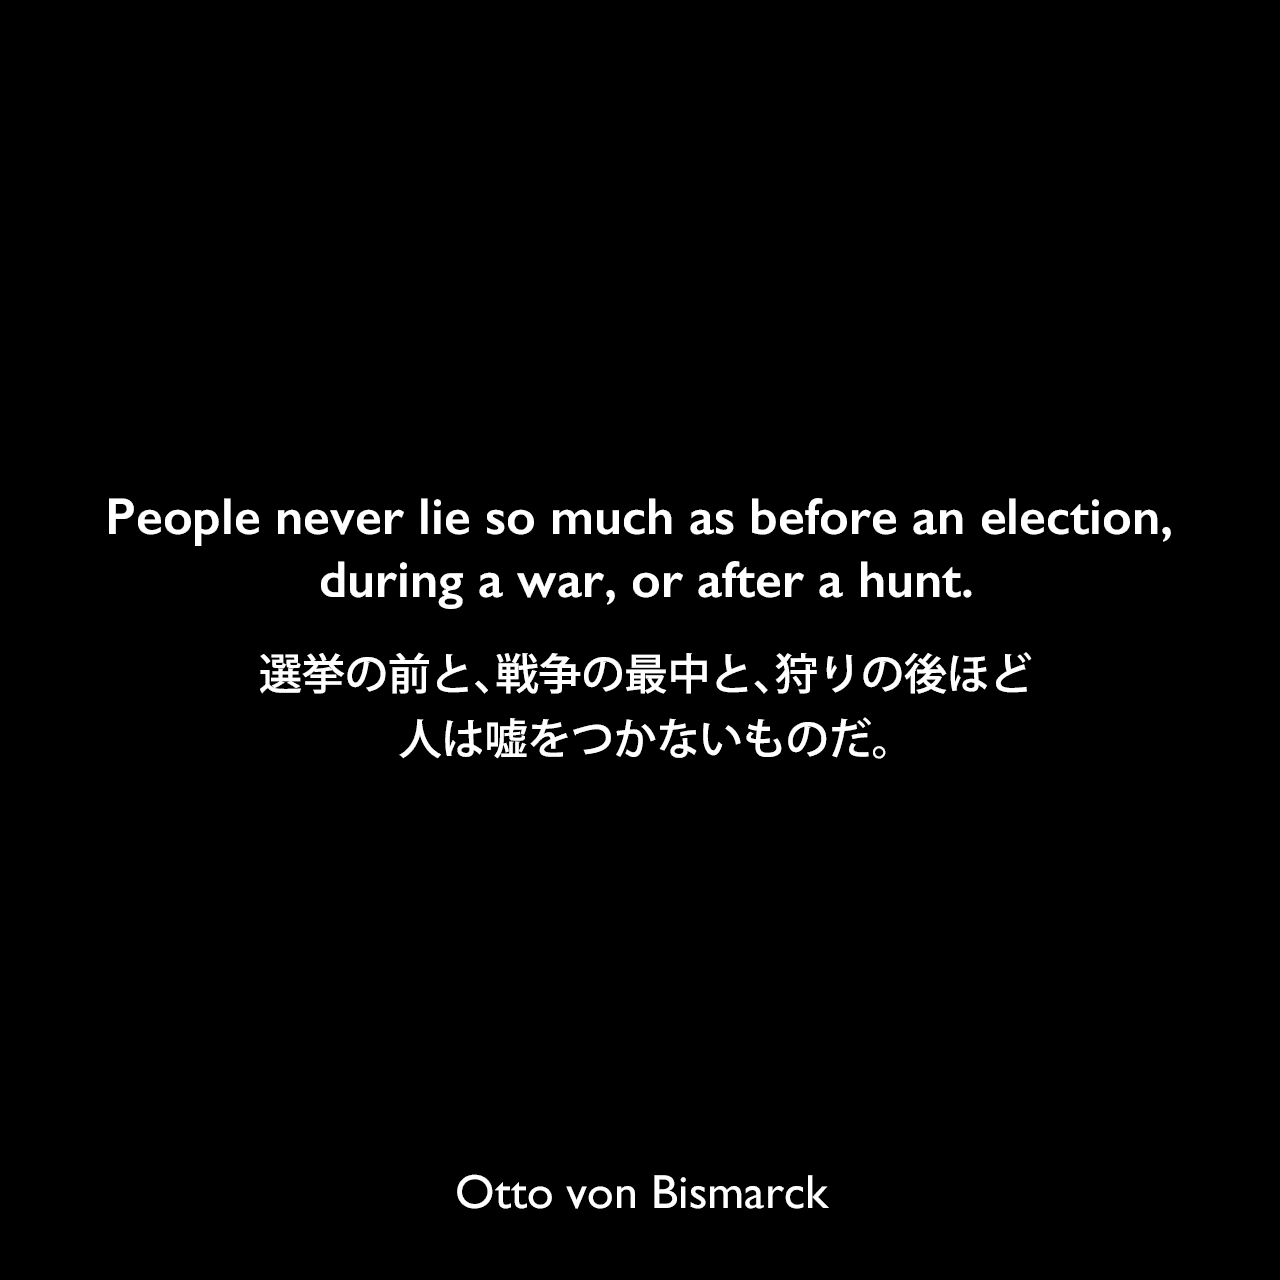 People never lie so much as before an election, during a war, or after a hunt.選挙の前と、戦争の最中と、狩りの後ほど人は嘘をつかないものだ。Otto von Bismarck